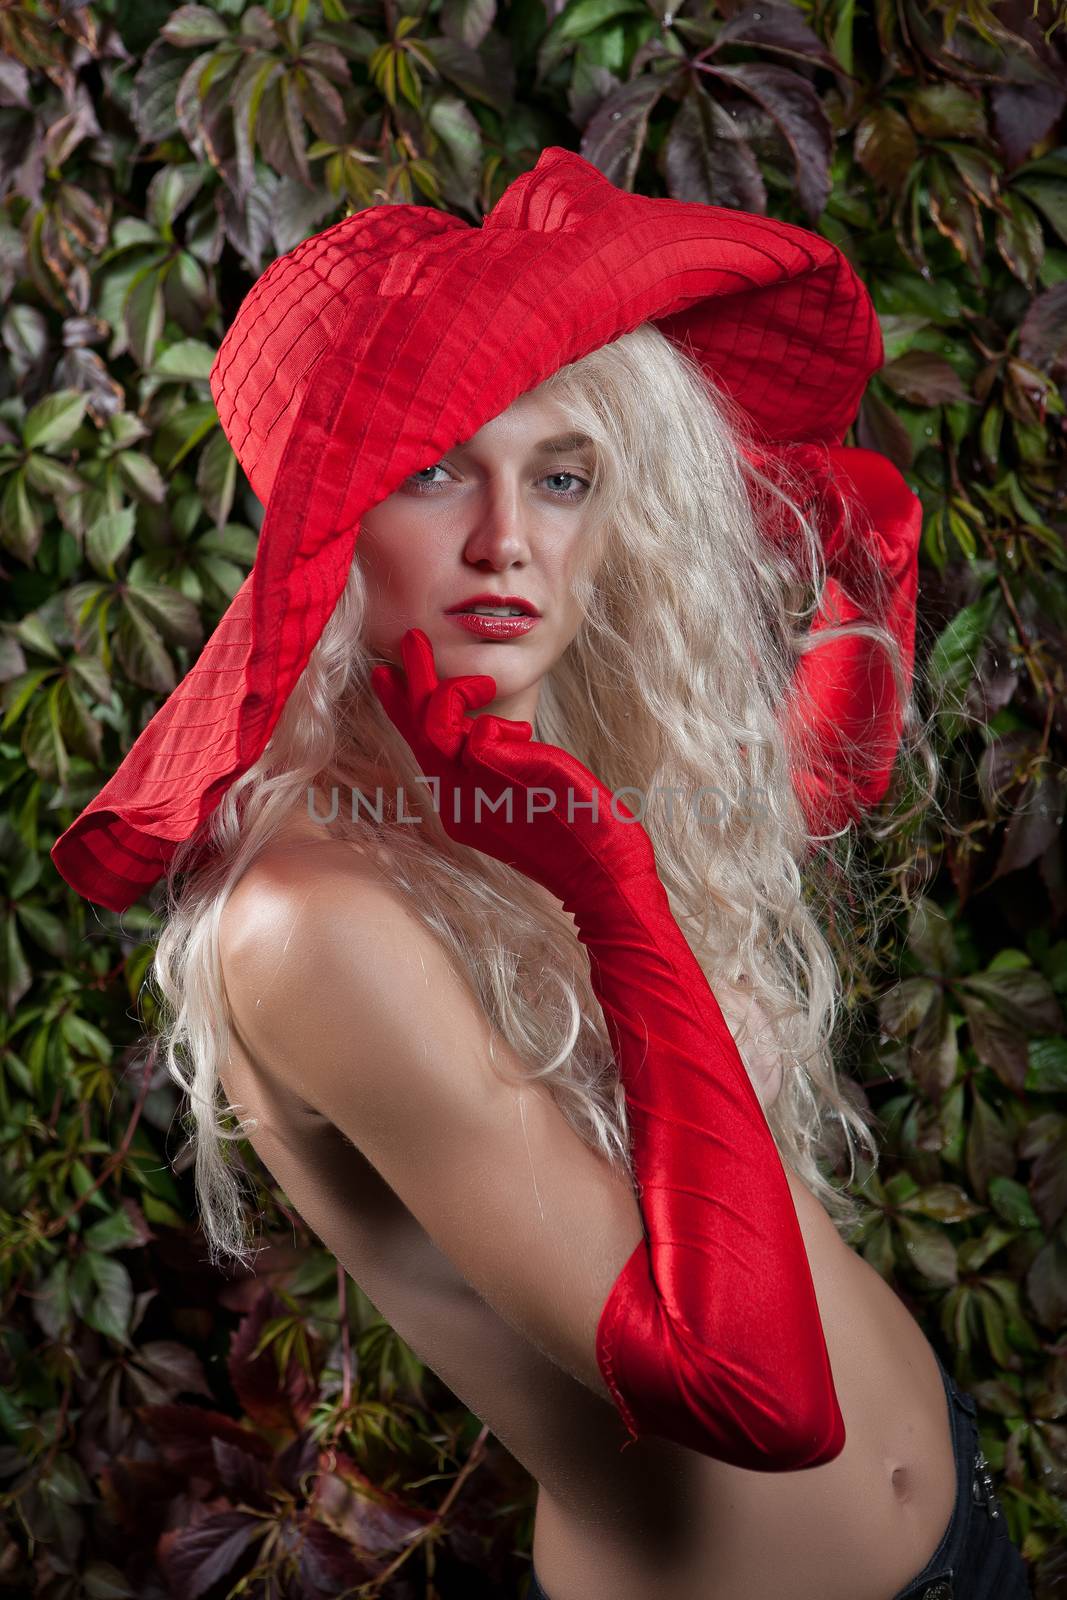 Young woman in a red hat and red long gloves in a garden